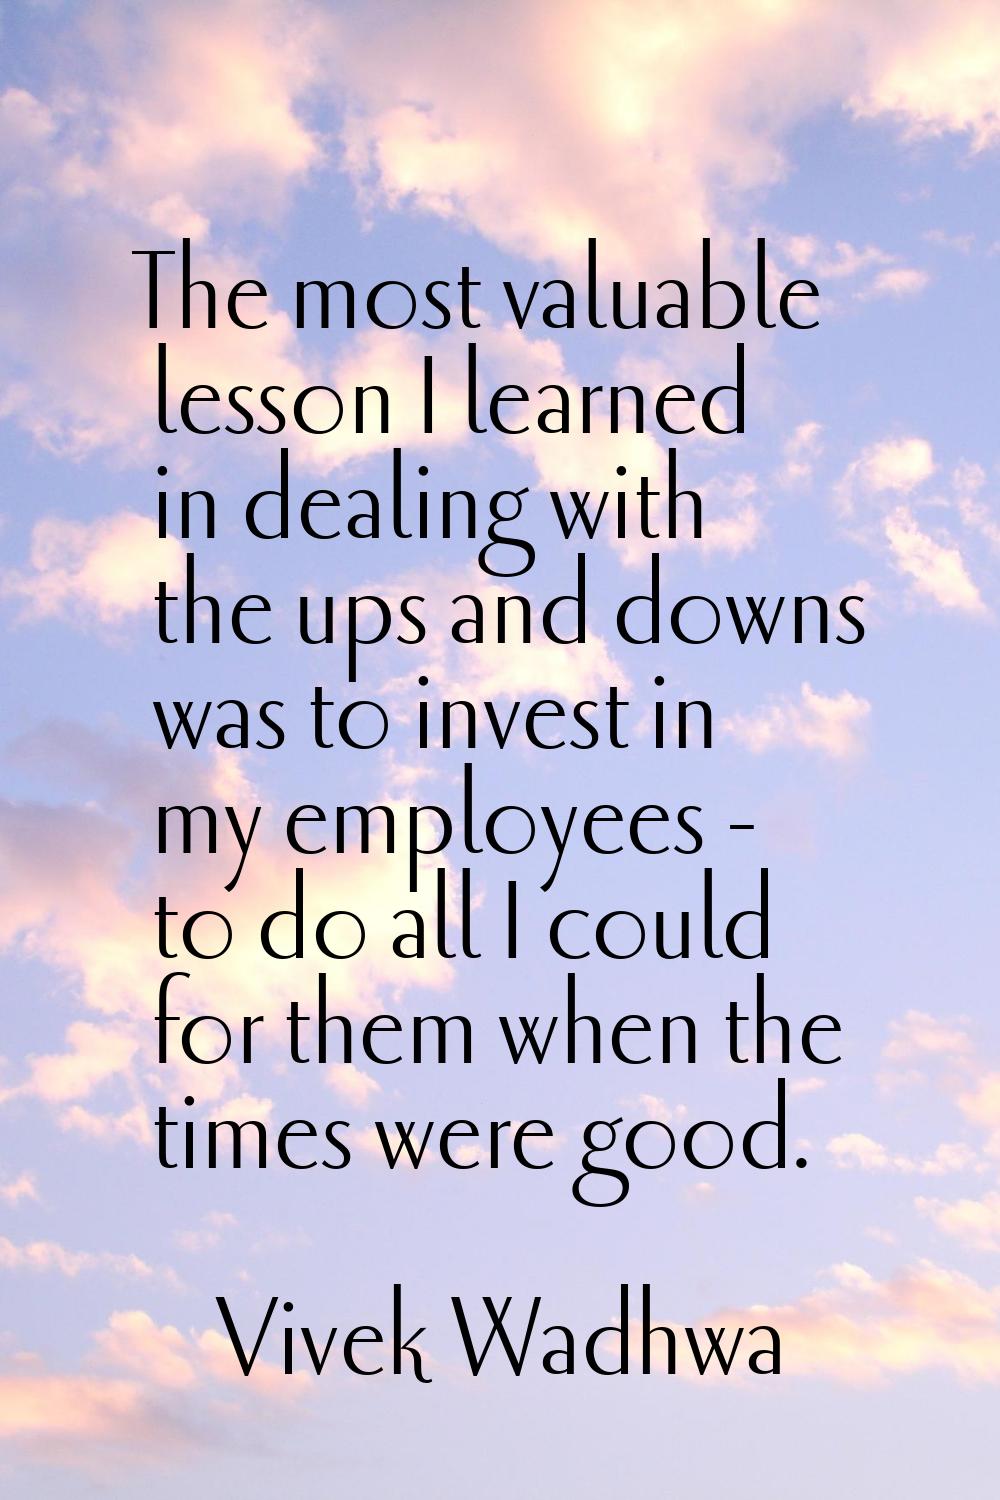 The most valuable lesson I learned in dealing with the ups and downs was to invest in my employees 